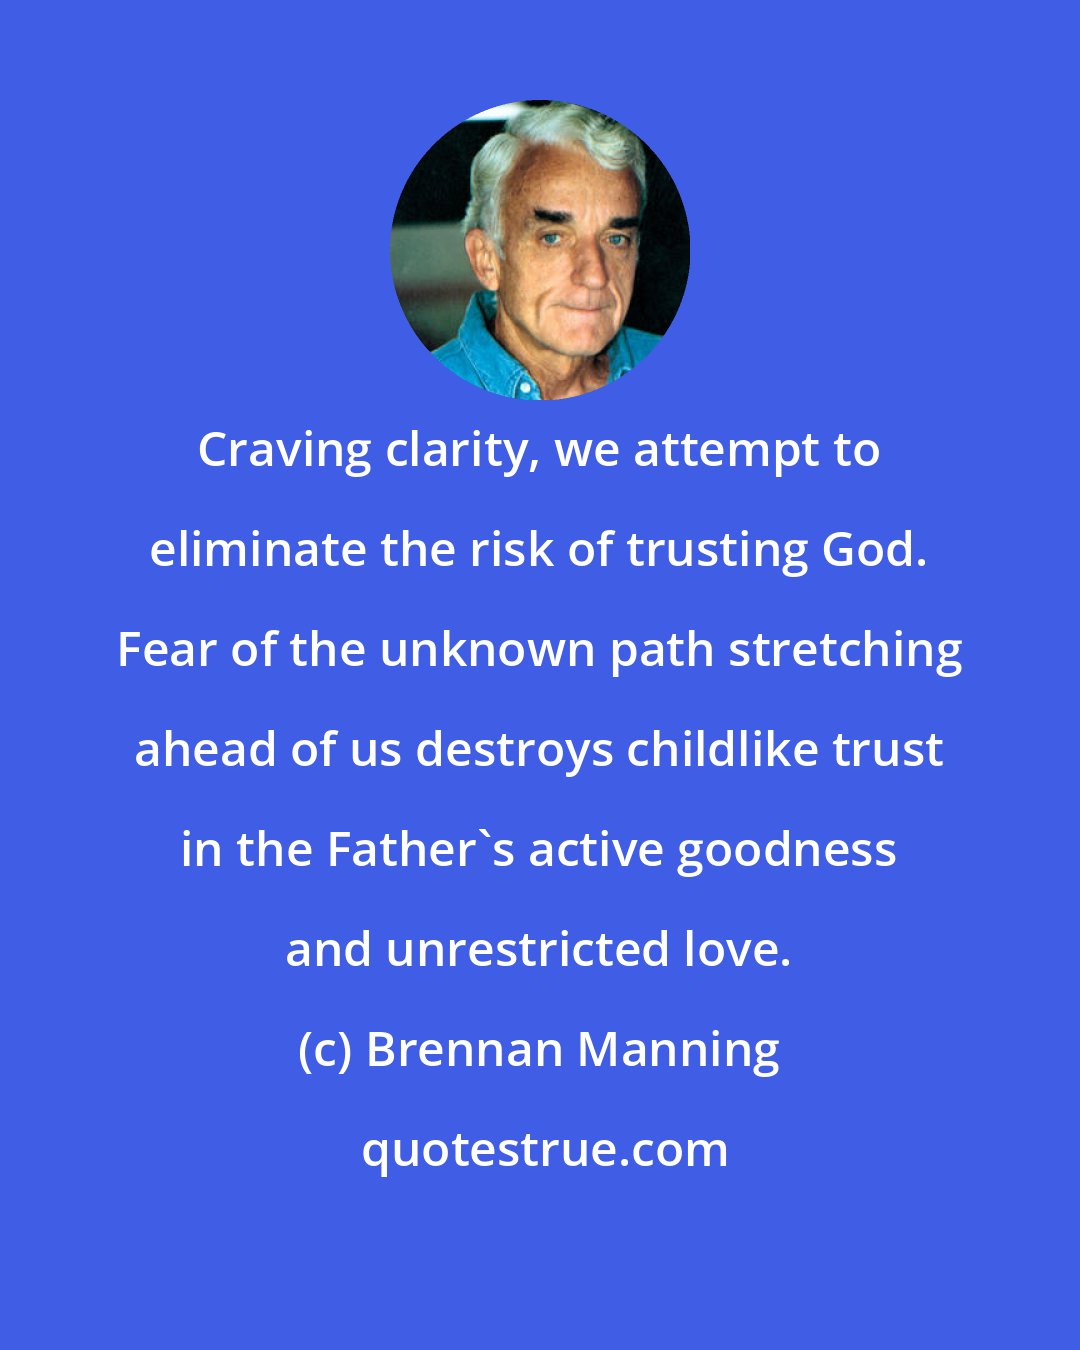 Brennan Manning: Craving clarity, we attempt to eliminate the risk of trusting God. Fear of the unknown path stretching ahead of us destroys childlike trust in the Father's active goodness and unrestricted love.